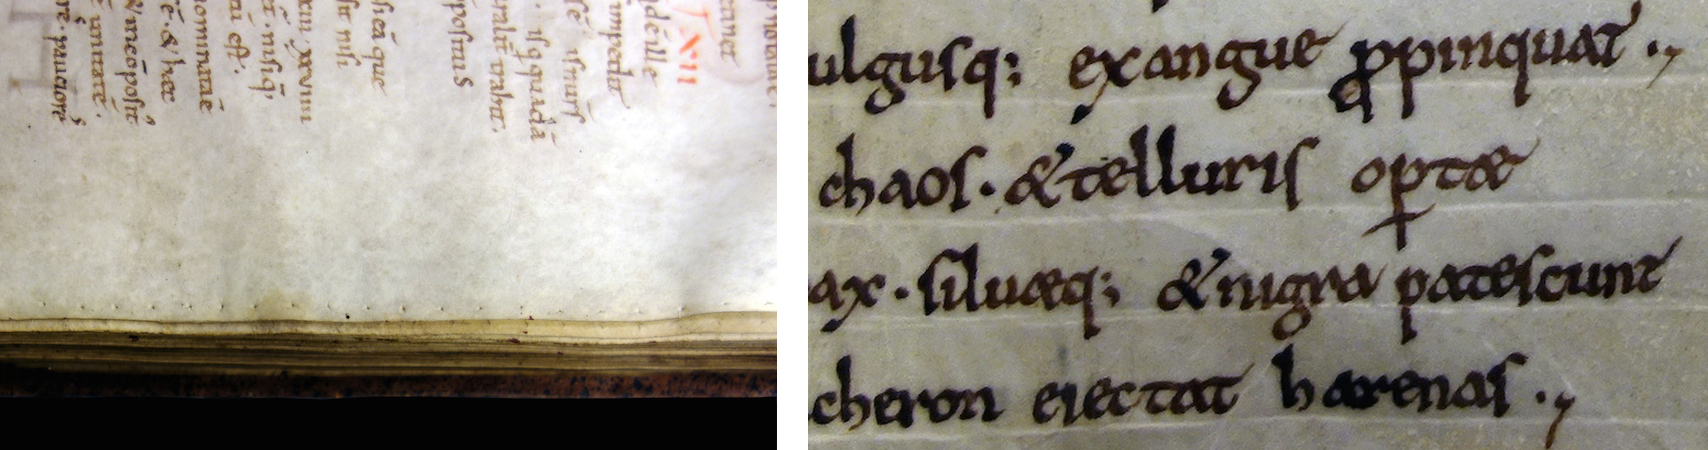 Left: Prickings at the parchment edge used to create a ruled page. Boethius, De institutione arithmetica, c. 1100 (Royal Library, The Hague, MS 78 E 59); right: Blind rules created with a hard point (detail), Statius, Thebais, c. 1100 (Royal Library, The Hague, MS 128 A 38)